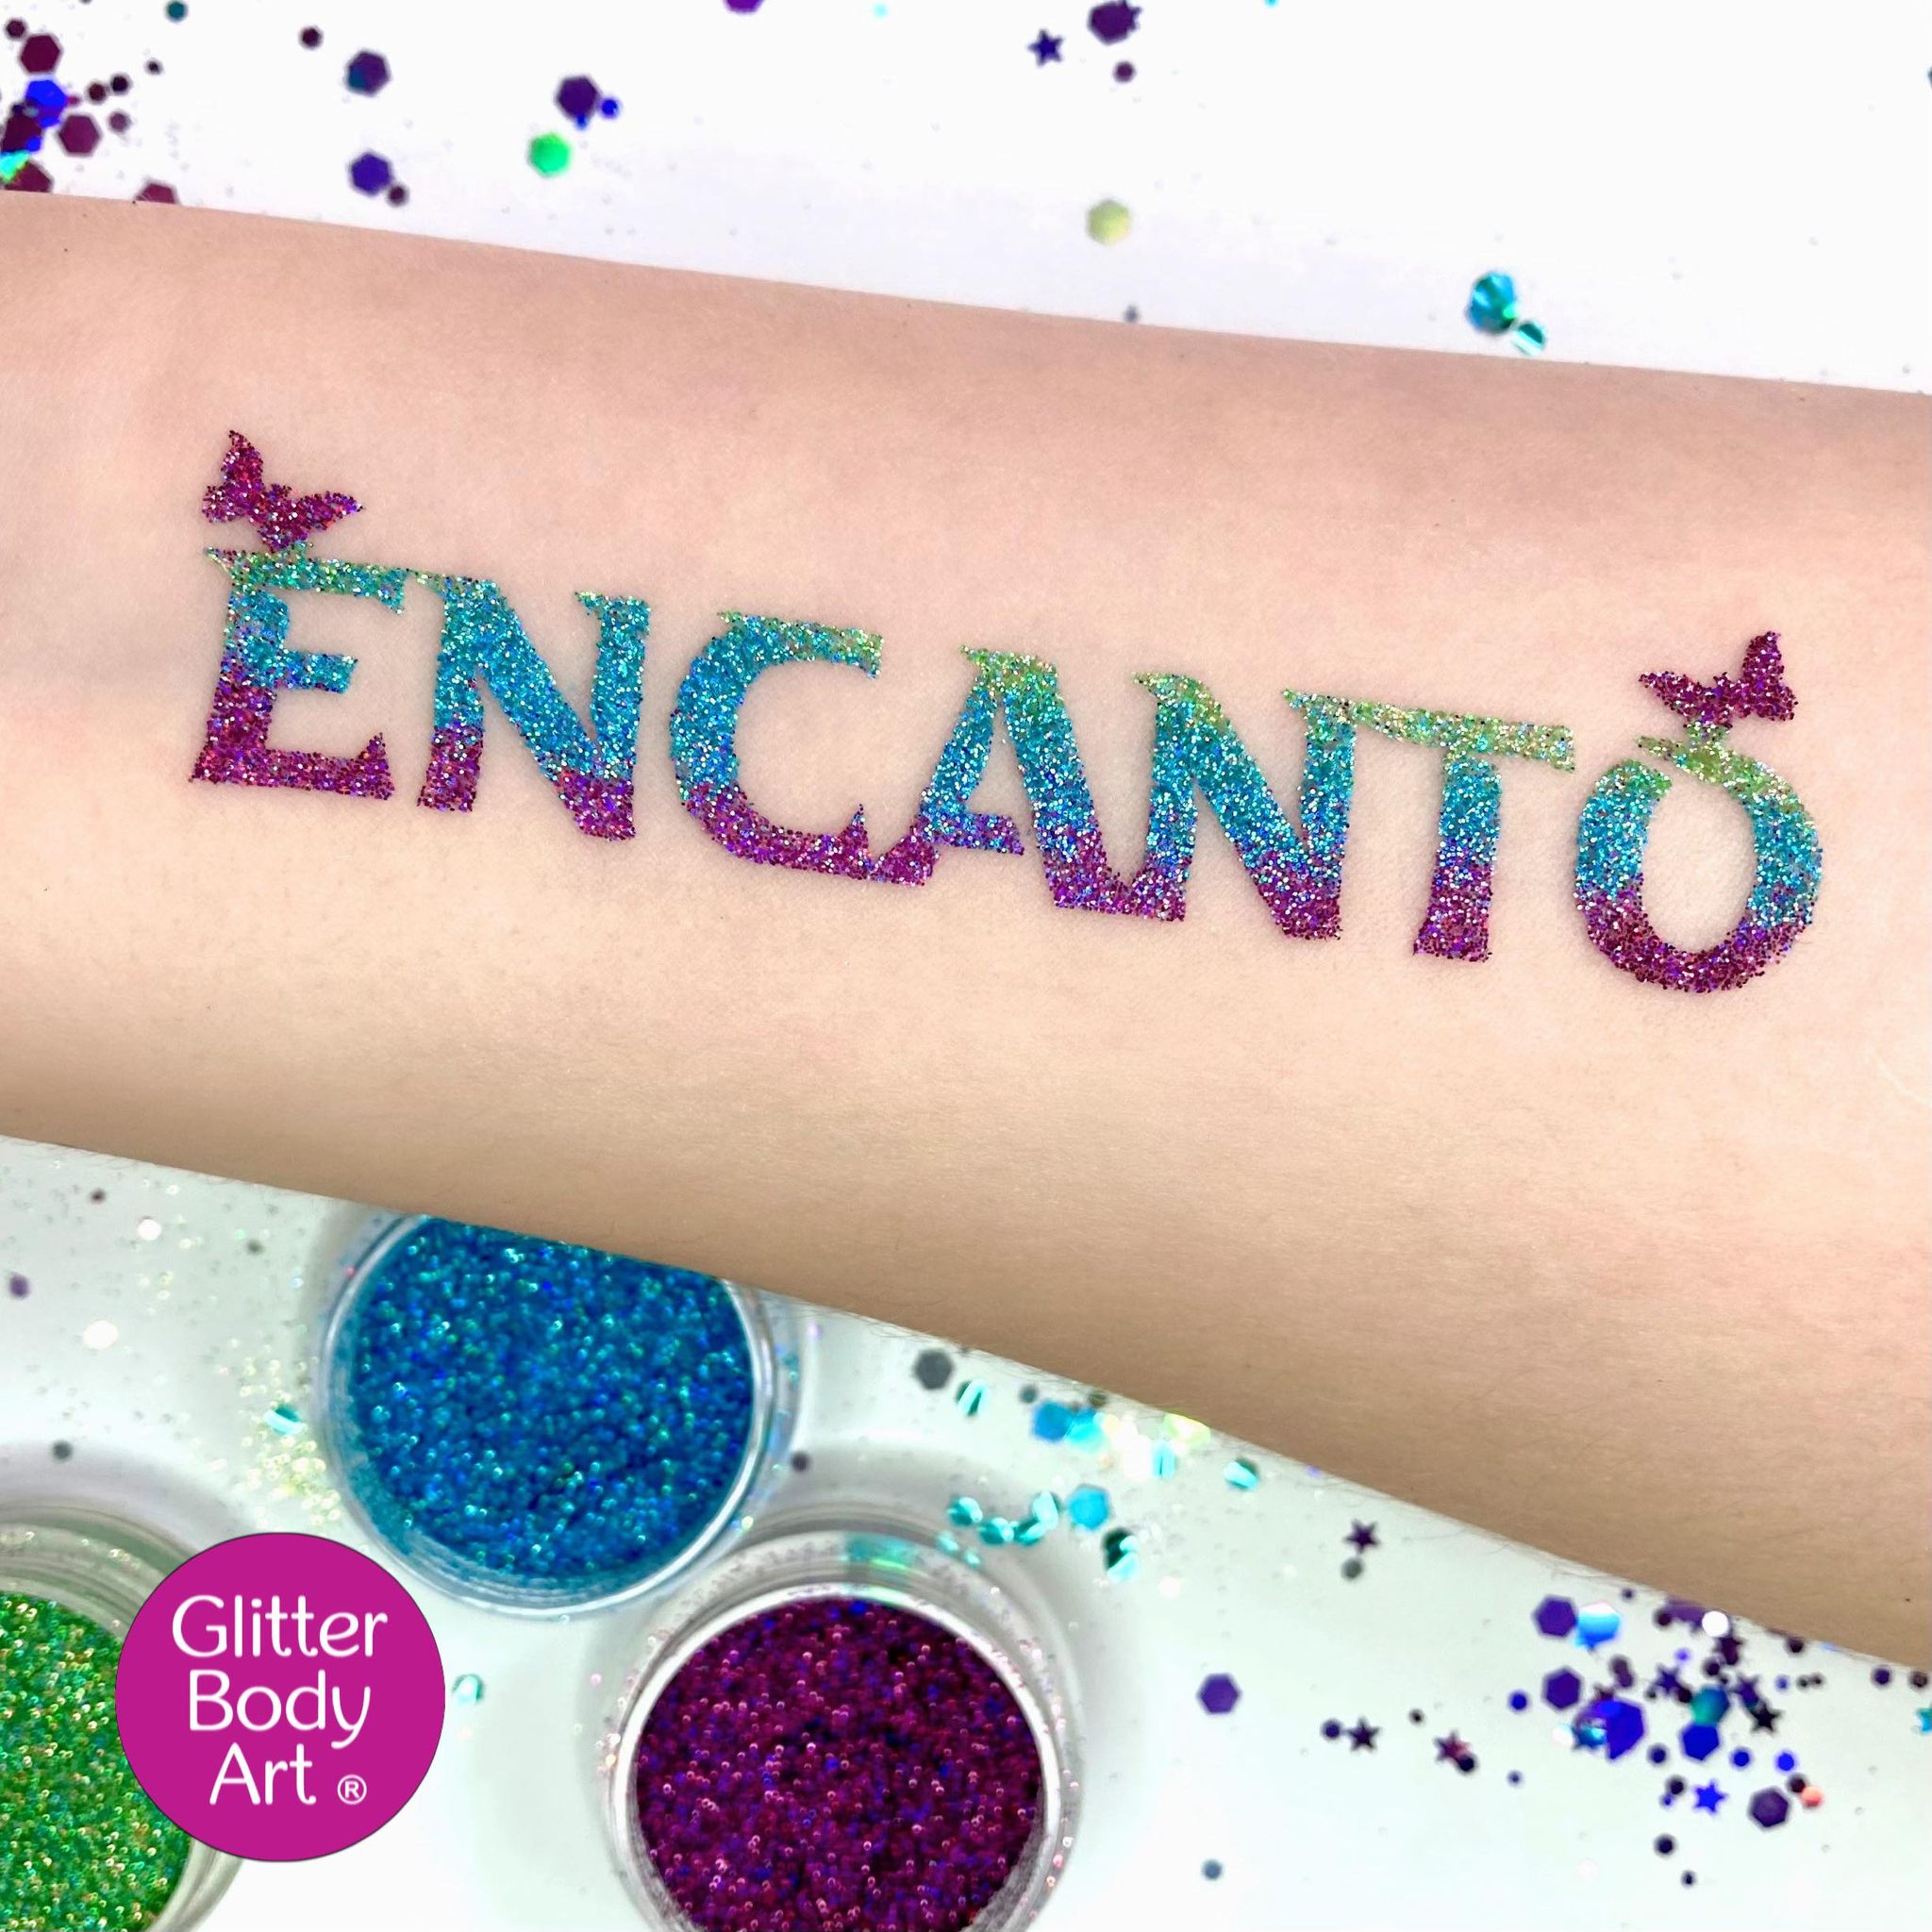 Encanto Glitter Tattoo stencils for kids birthday parties and events